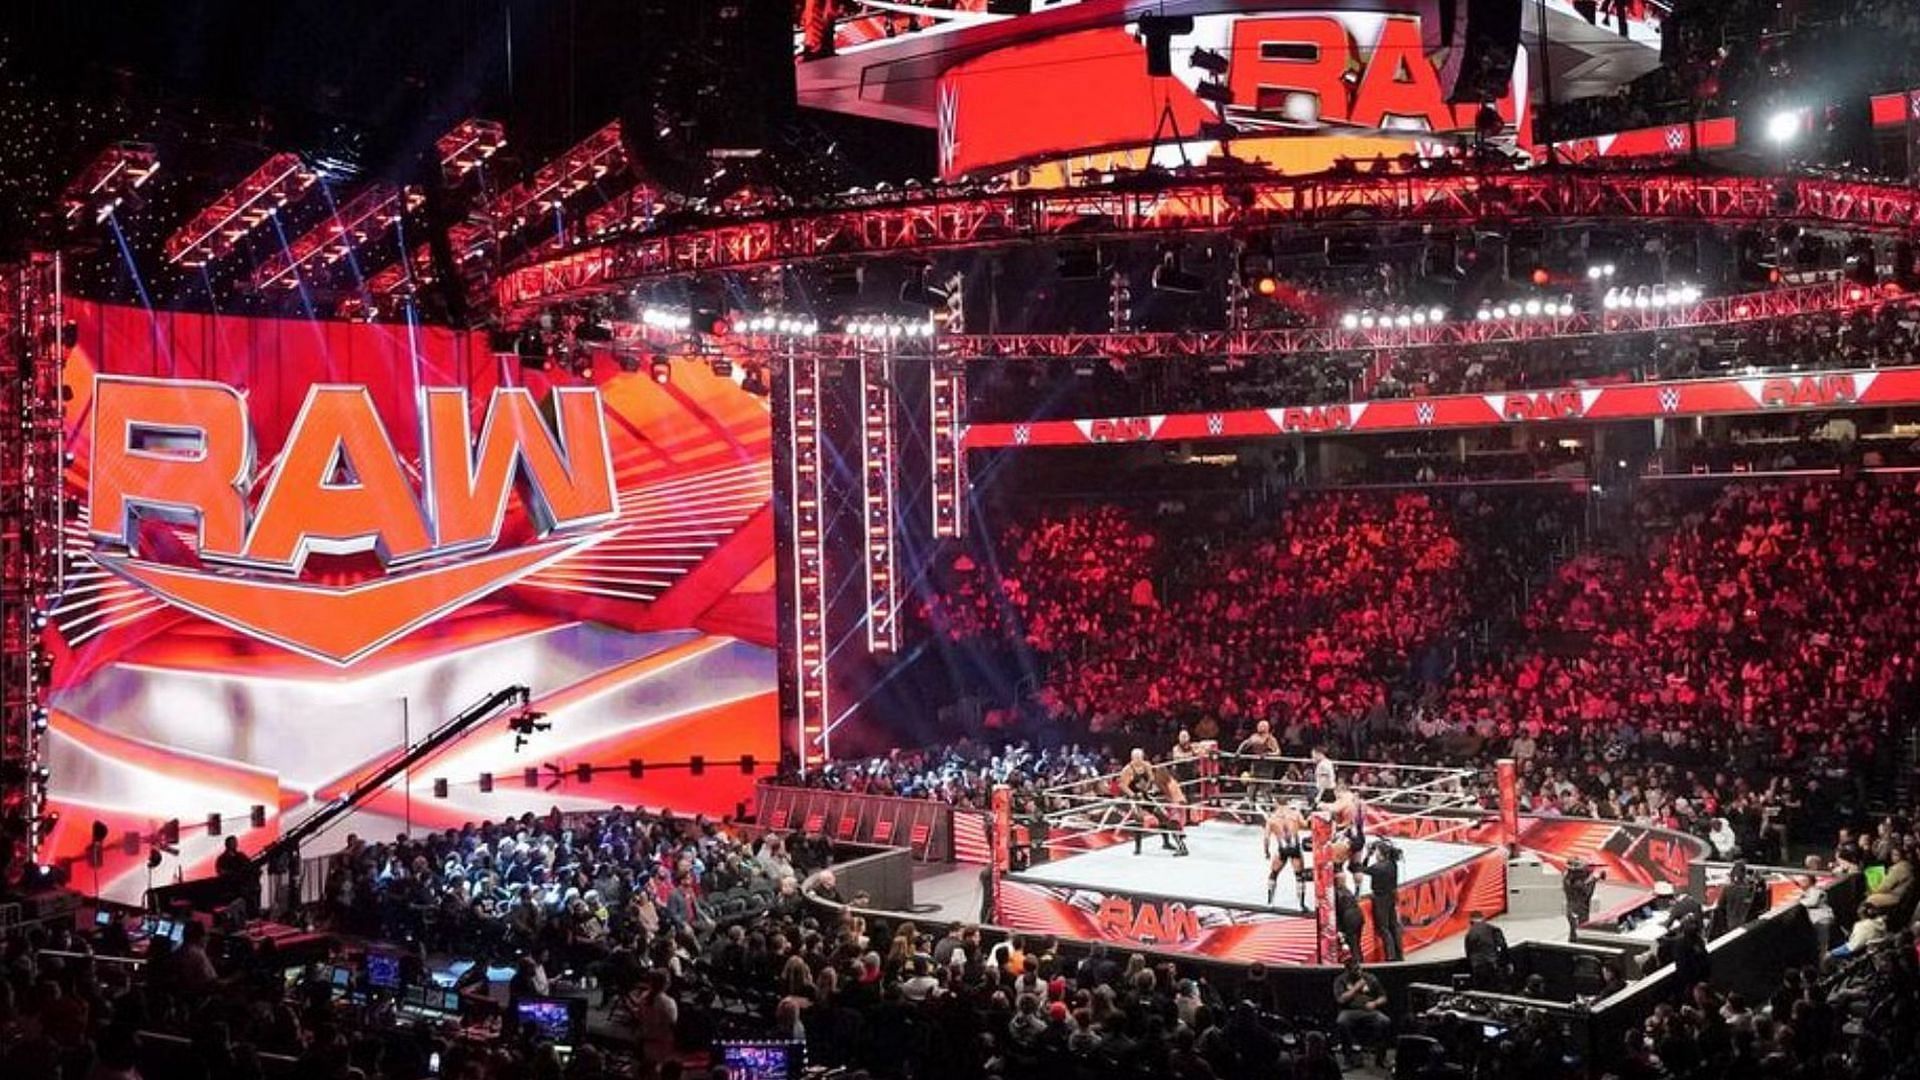 The WWE RAW logo and ring/set on display inside arena